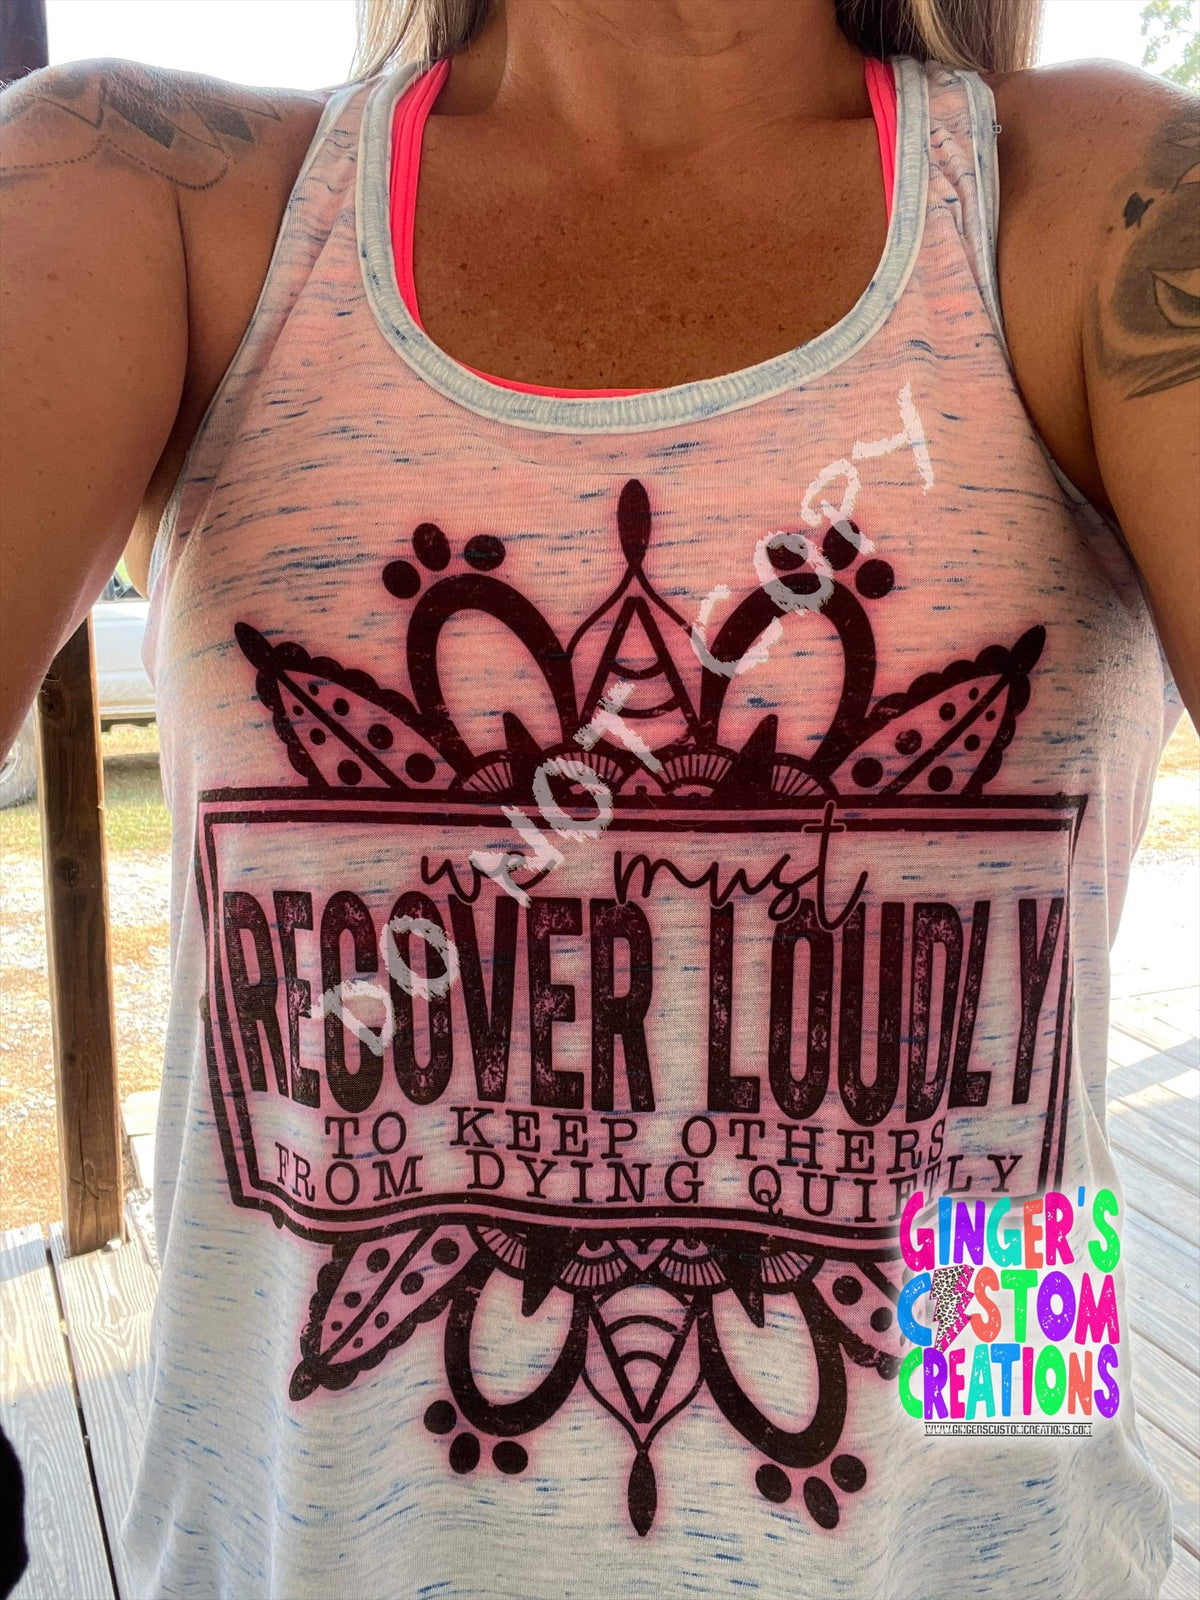 WE MUST RECOVER LOUDLY HOPE DEALER FRONT & BACK TANK TOP